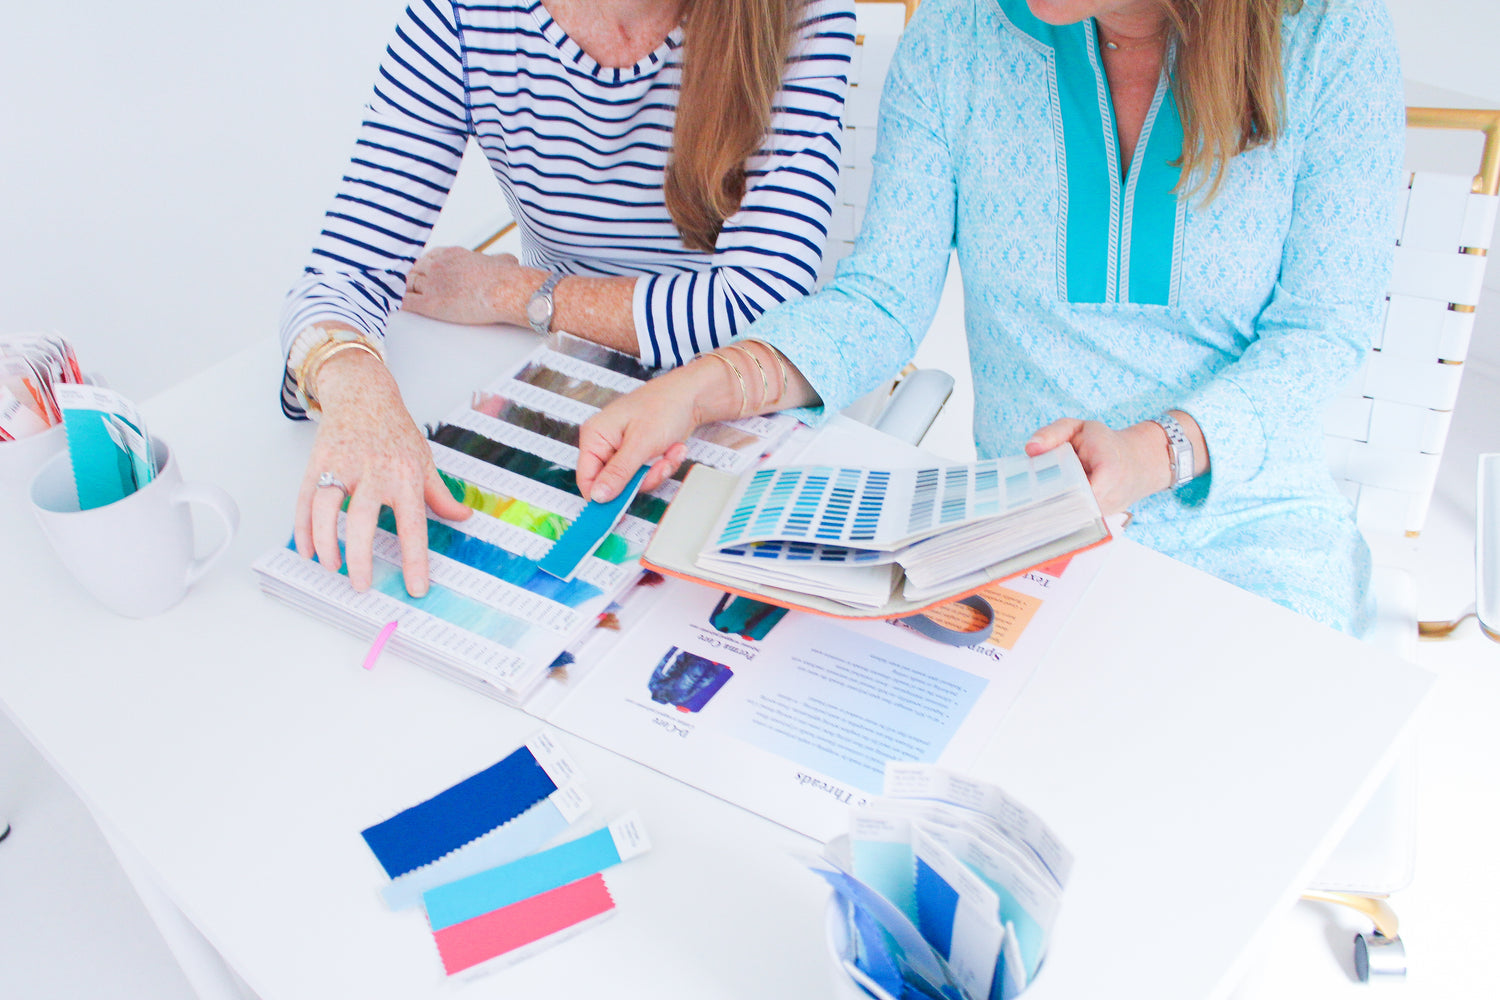 Women's hands looking at pantone chips & books on desk